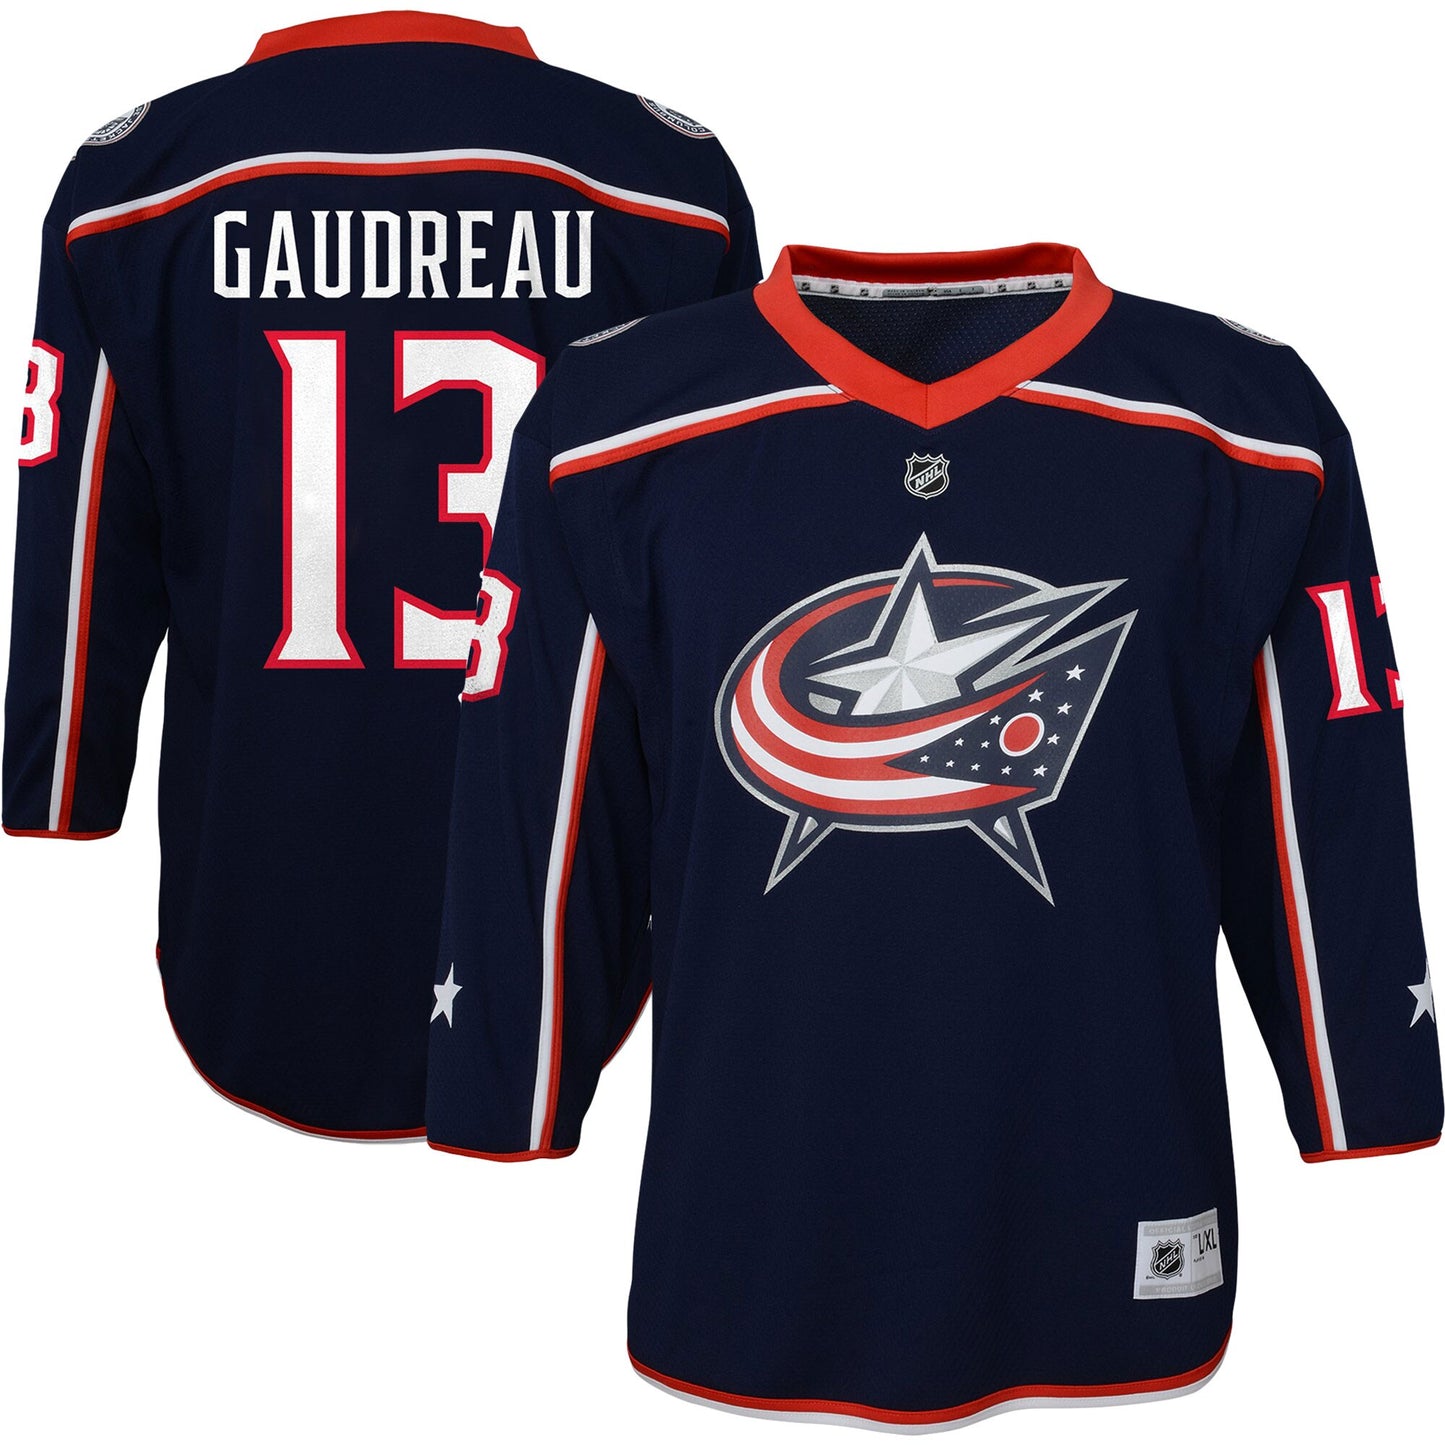 Johnny Gaudreau Columbus Blue Jackets Youth Replica Player Jersey - Navy